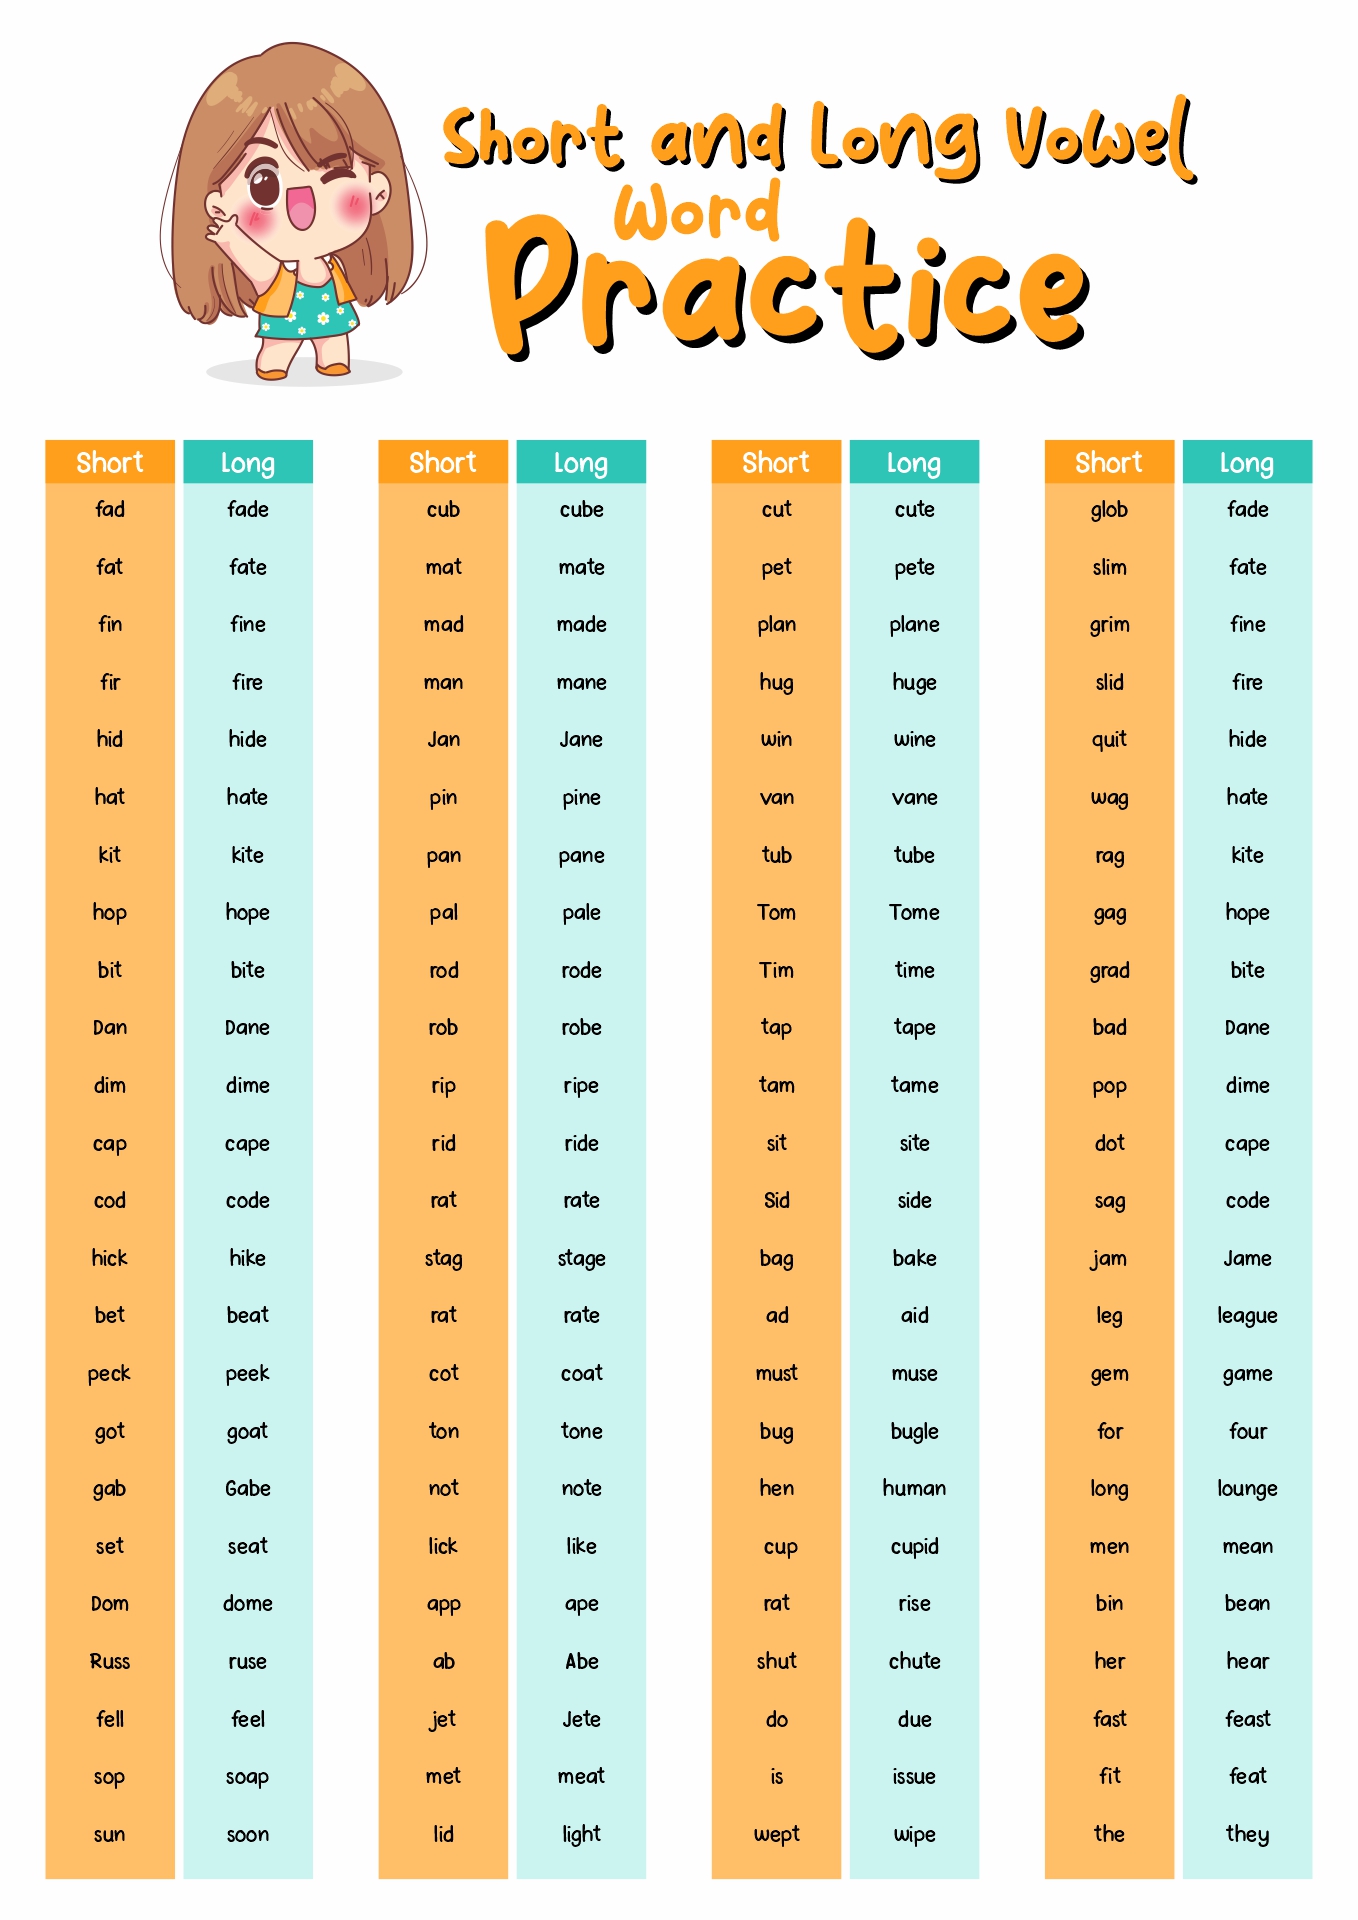 Long and Short Vowel Word List Image